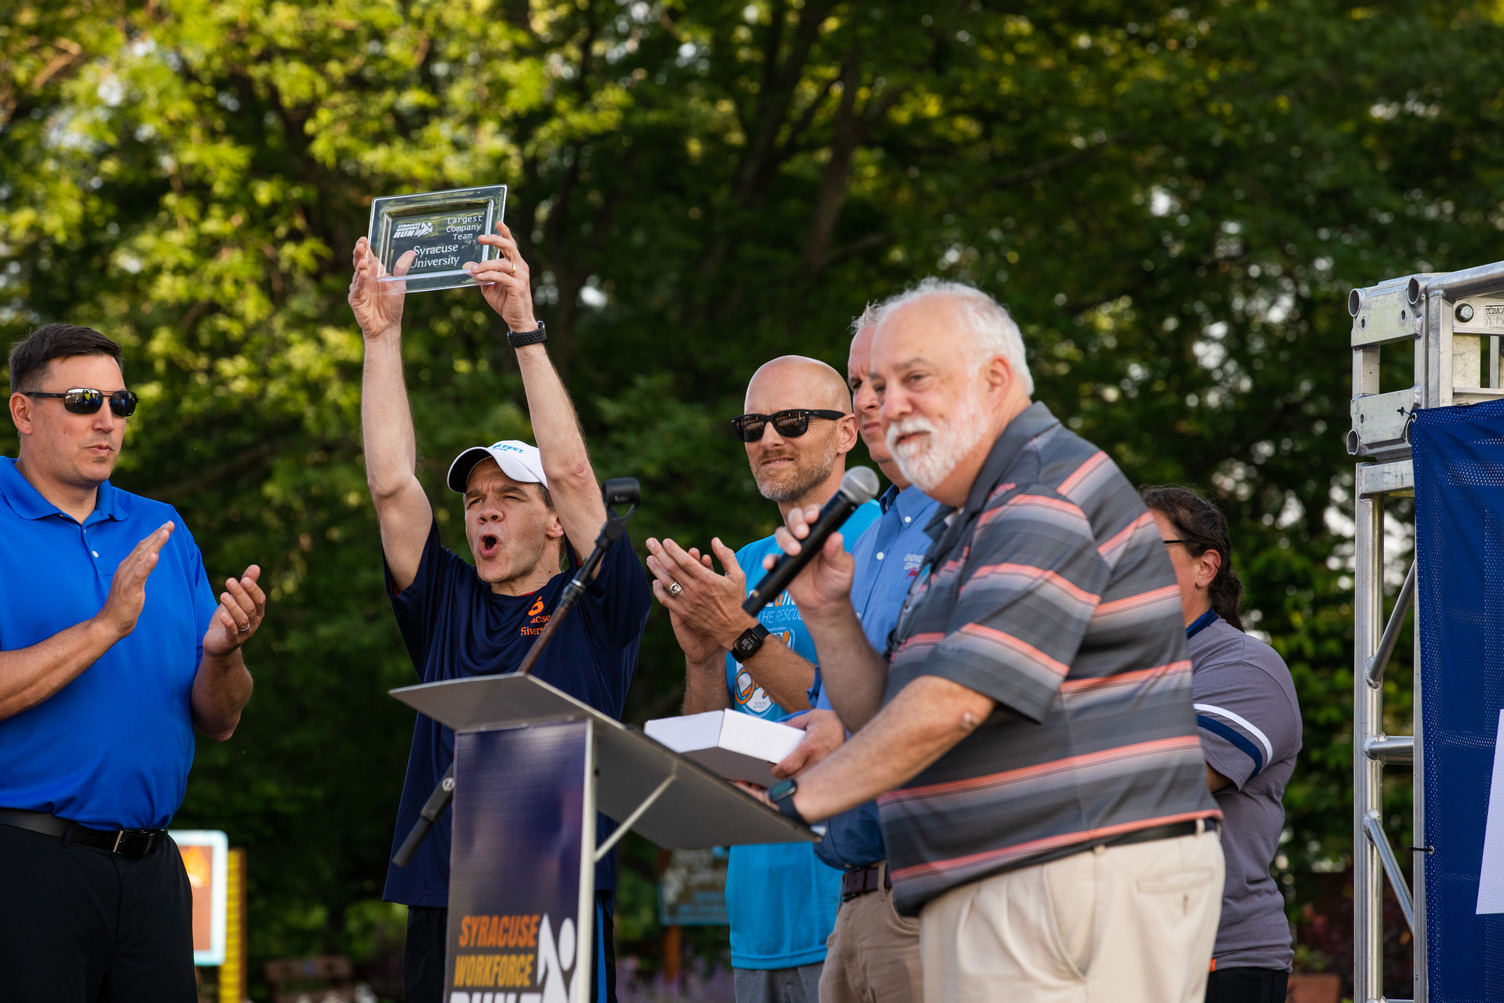 Dean of the College of Engineering and Computer Science J. Cole Smith holds up an award for the most participants recruited for the Syracuse Workforce Run